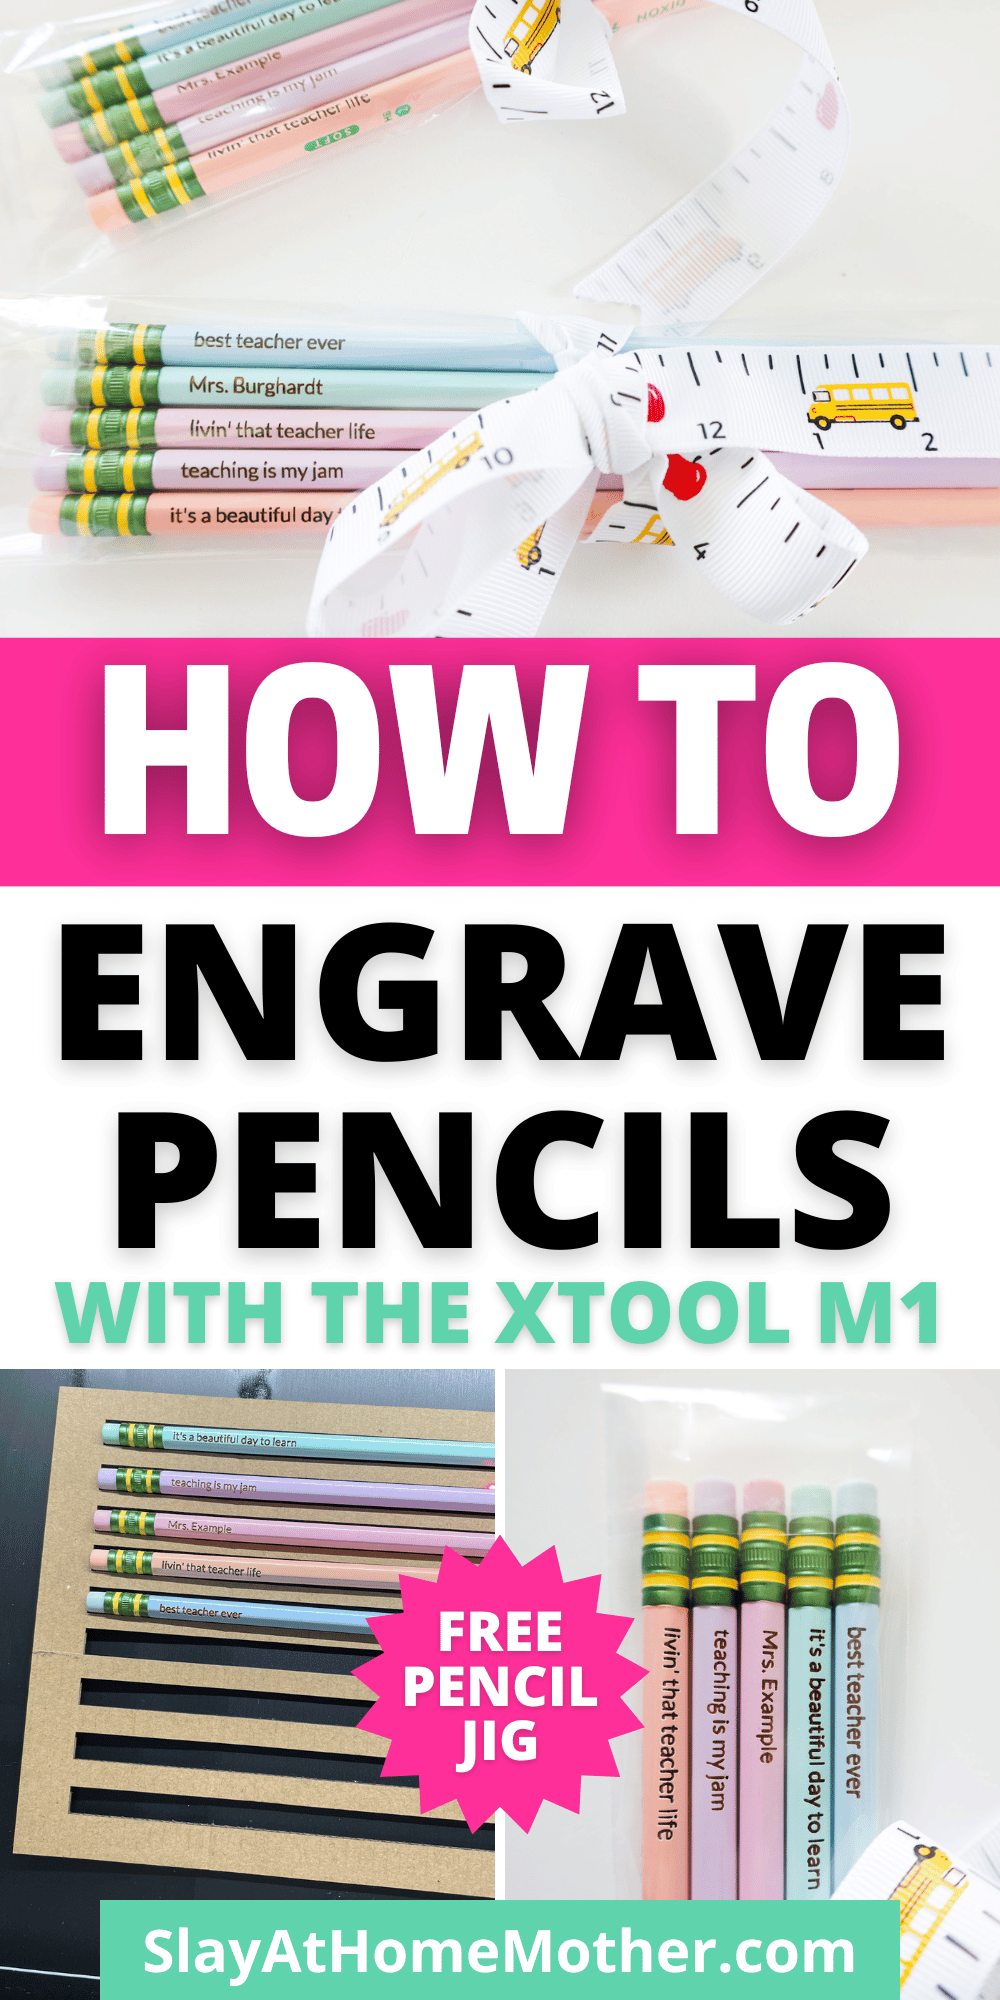 how to engrave pencils tutorial pin